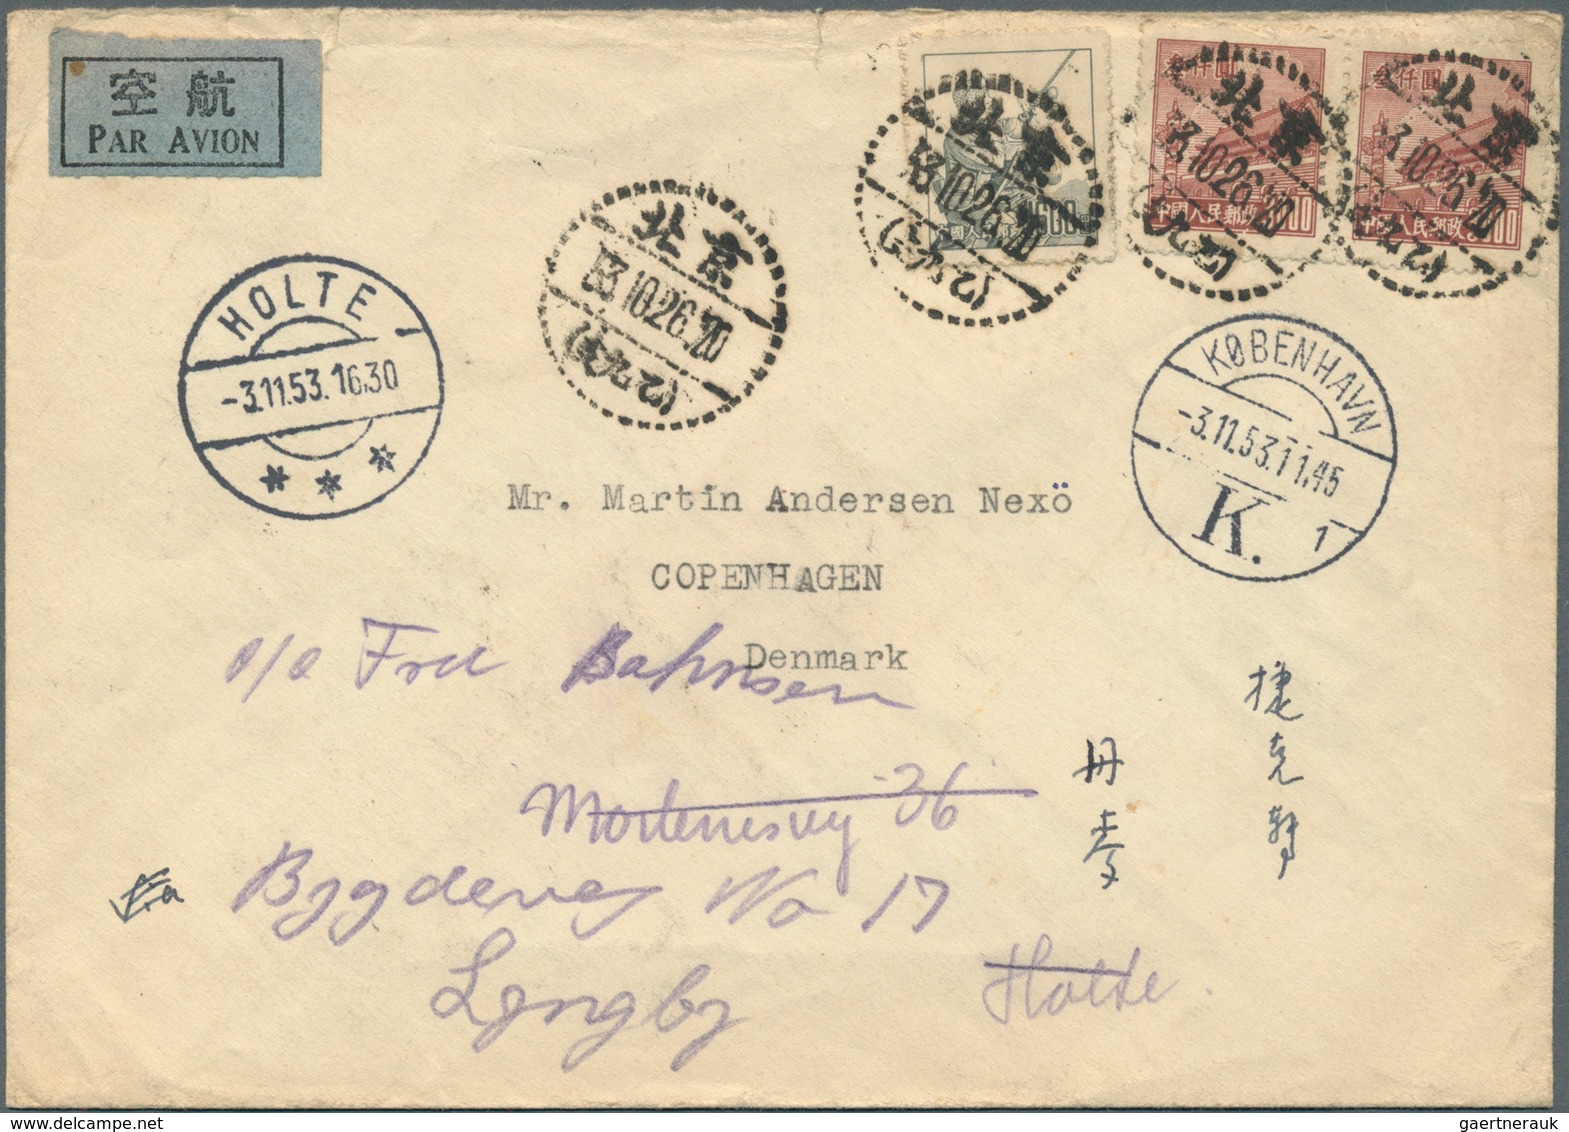 China - Volksrepublik: 1950/53, five air mail covers with Tien An Men issues inc. four registered to